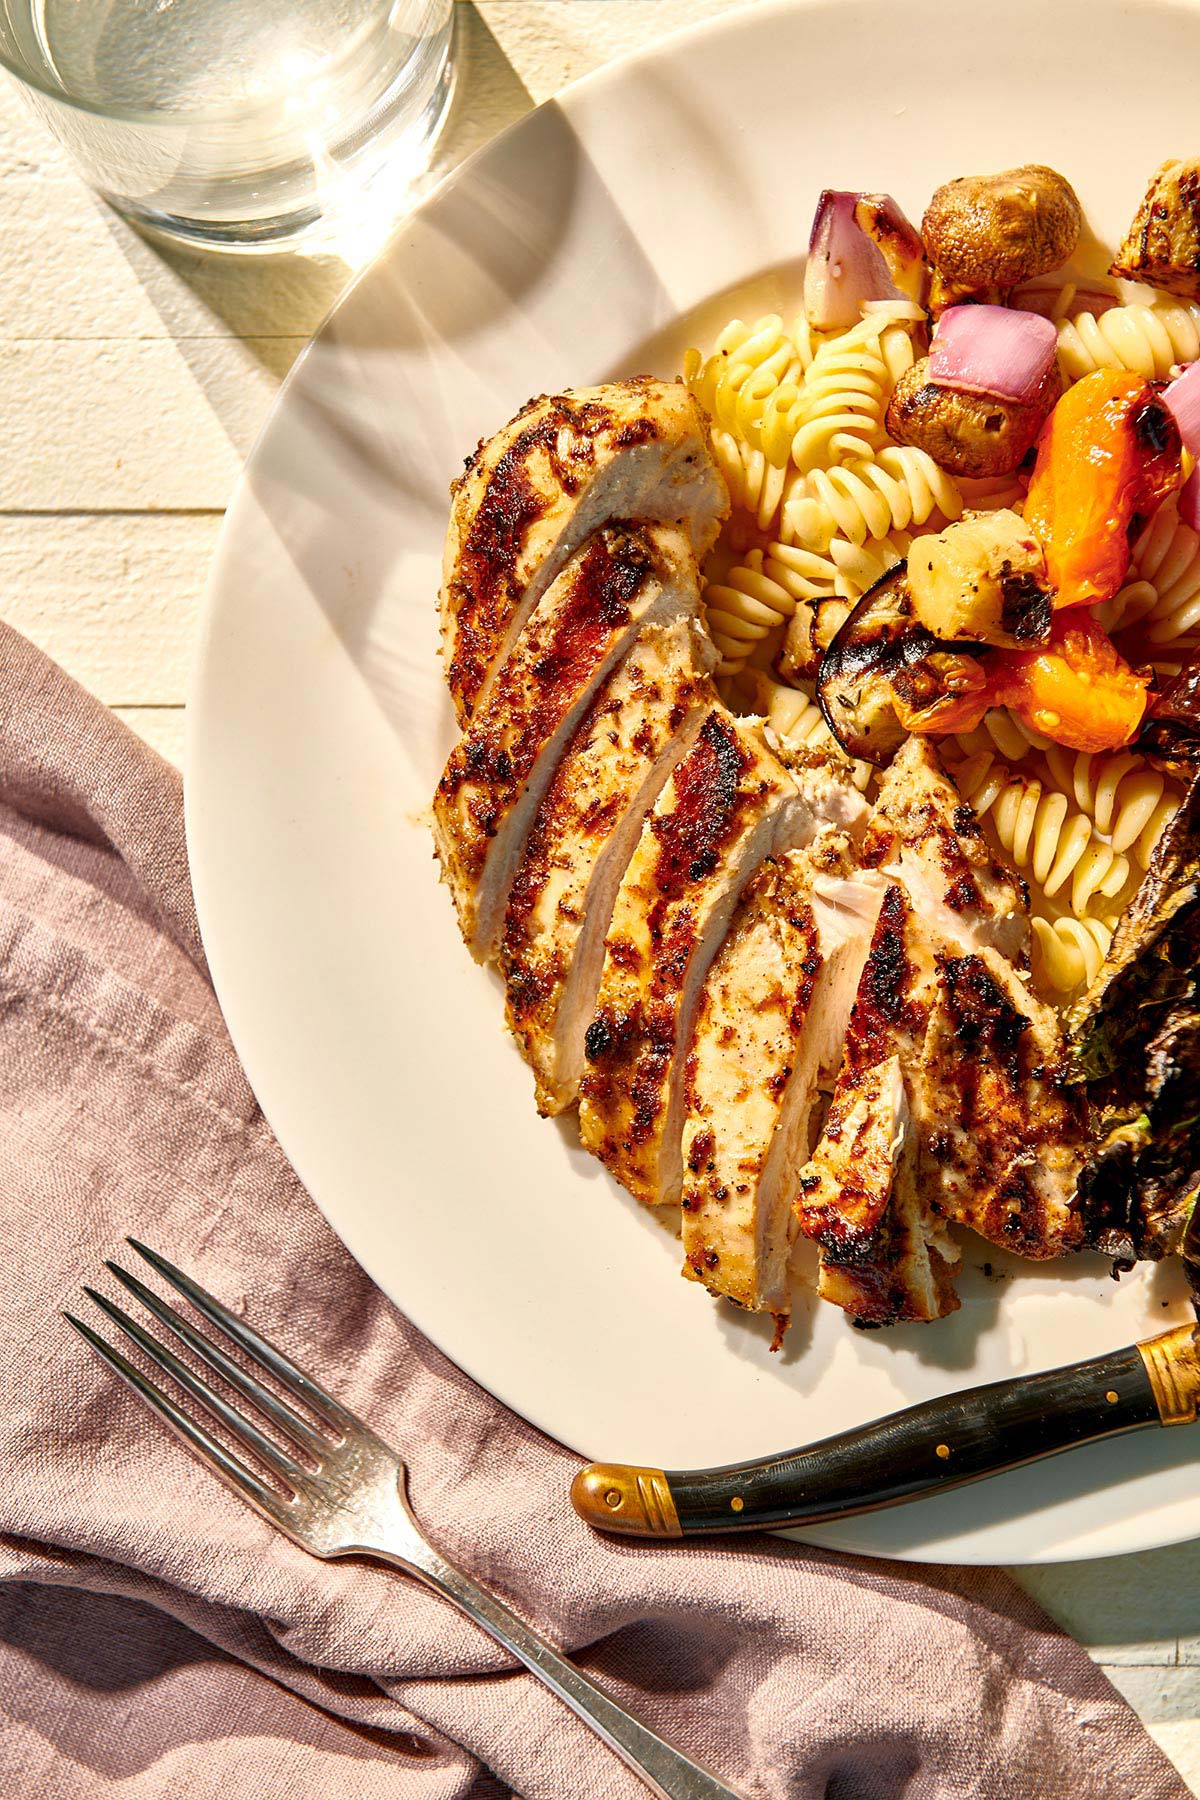 Grilled Jamaican jerk chicken breasts on plate with veggies.